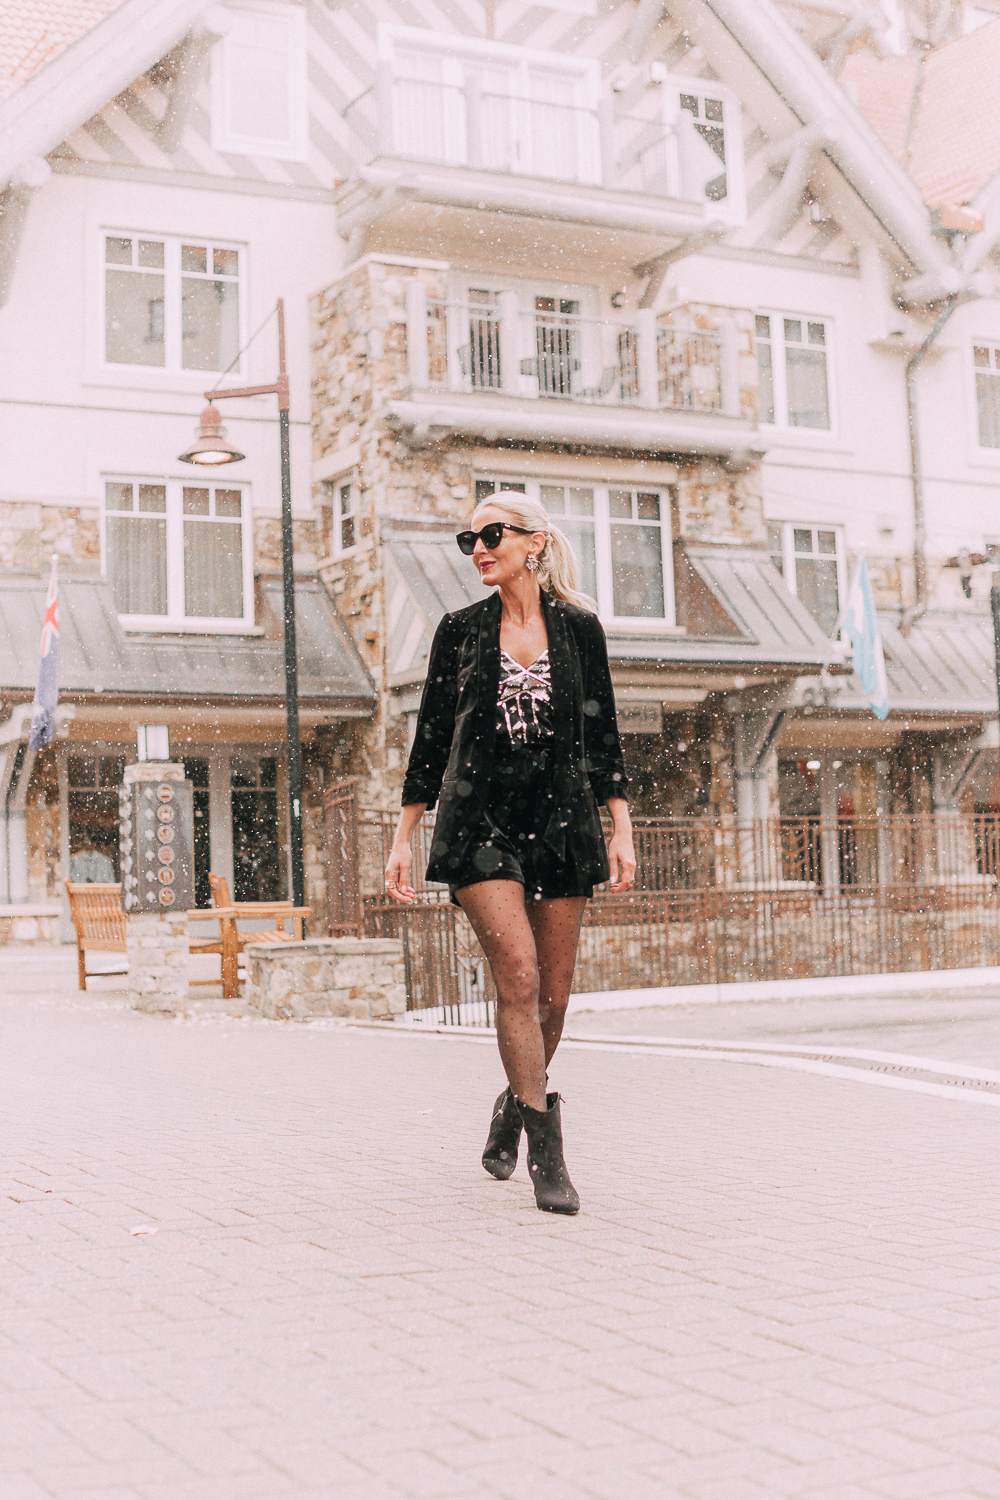 Unexpected holiday party outfits featuring a velvet Shorts suit from Express paired with Western black booties, and polka dot black tights on fashion blogger with blonde hair